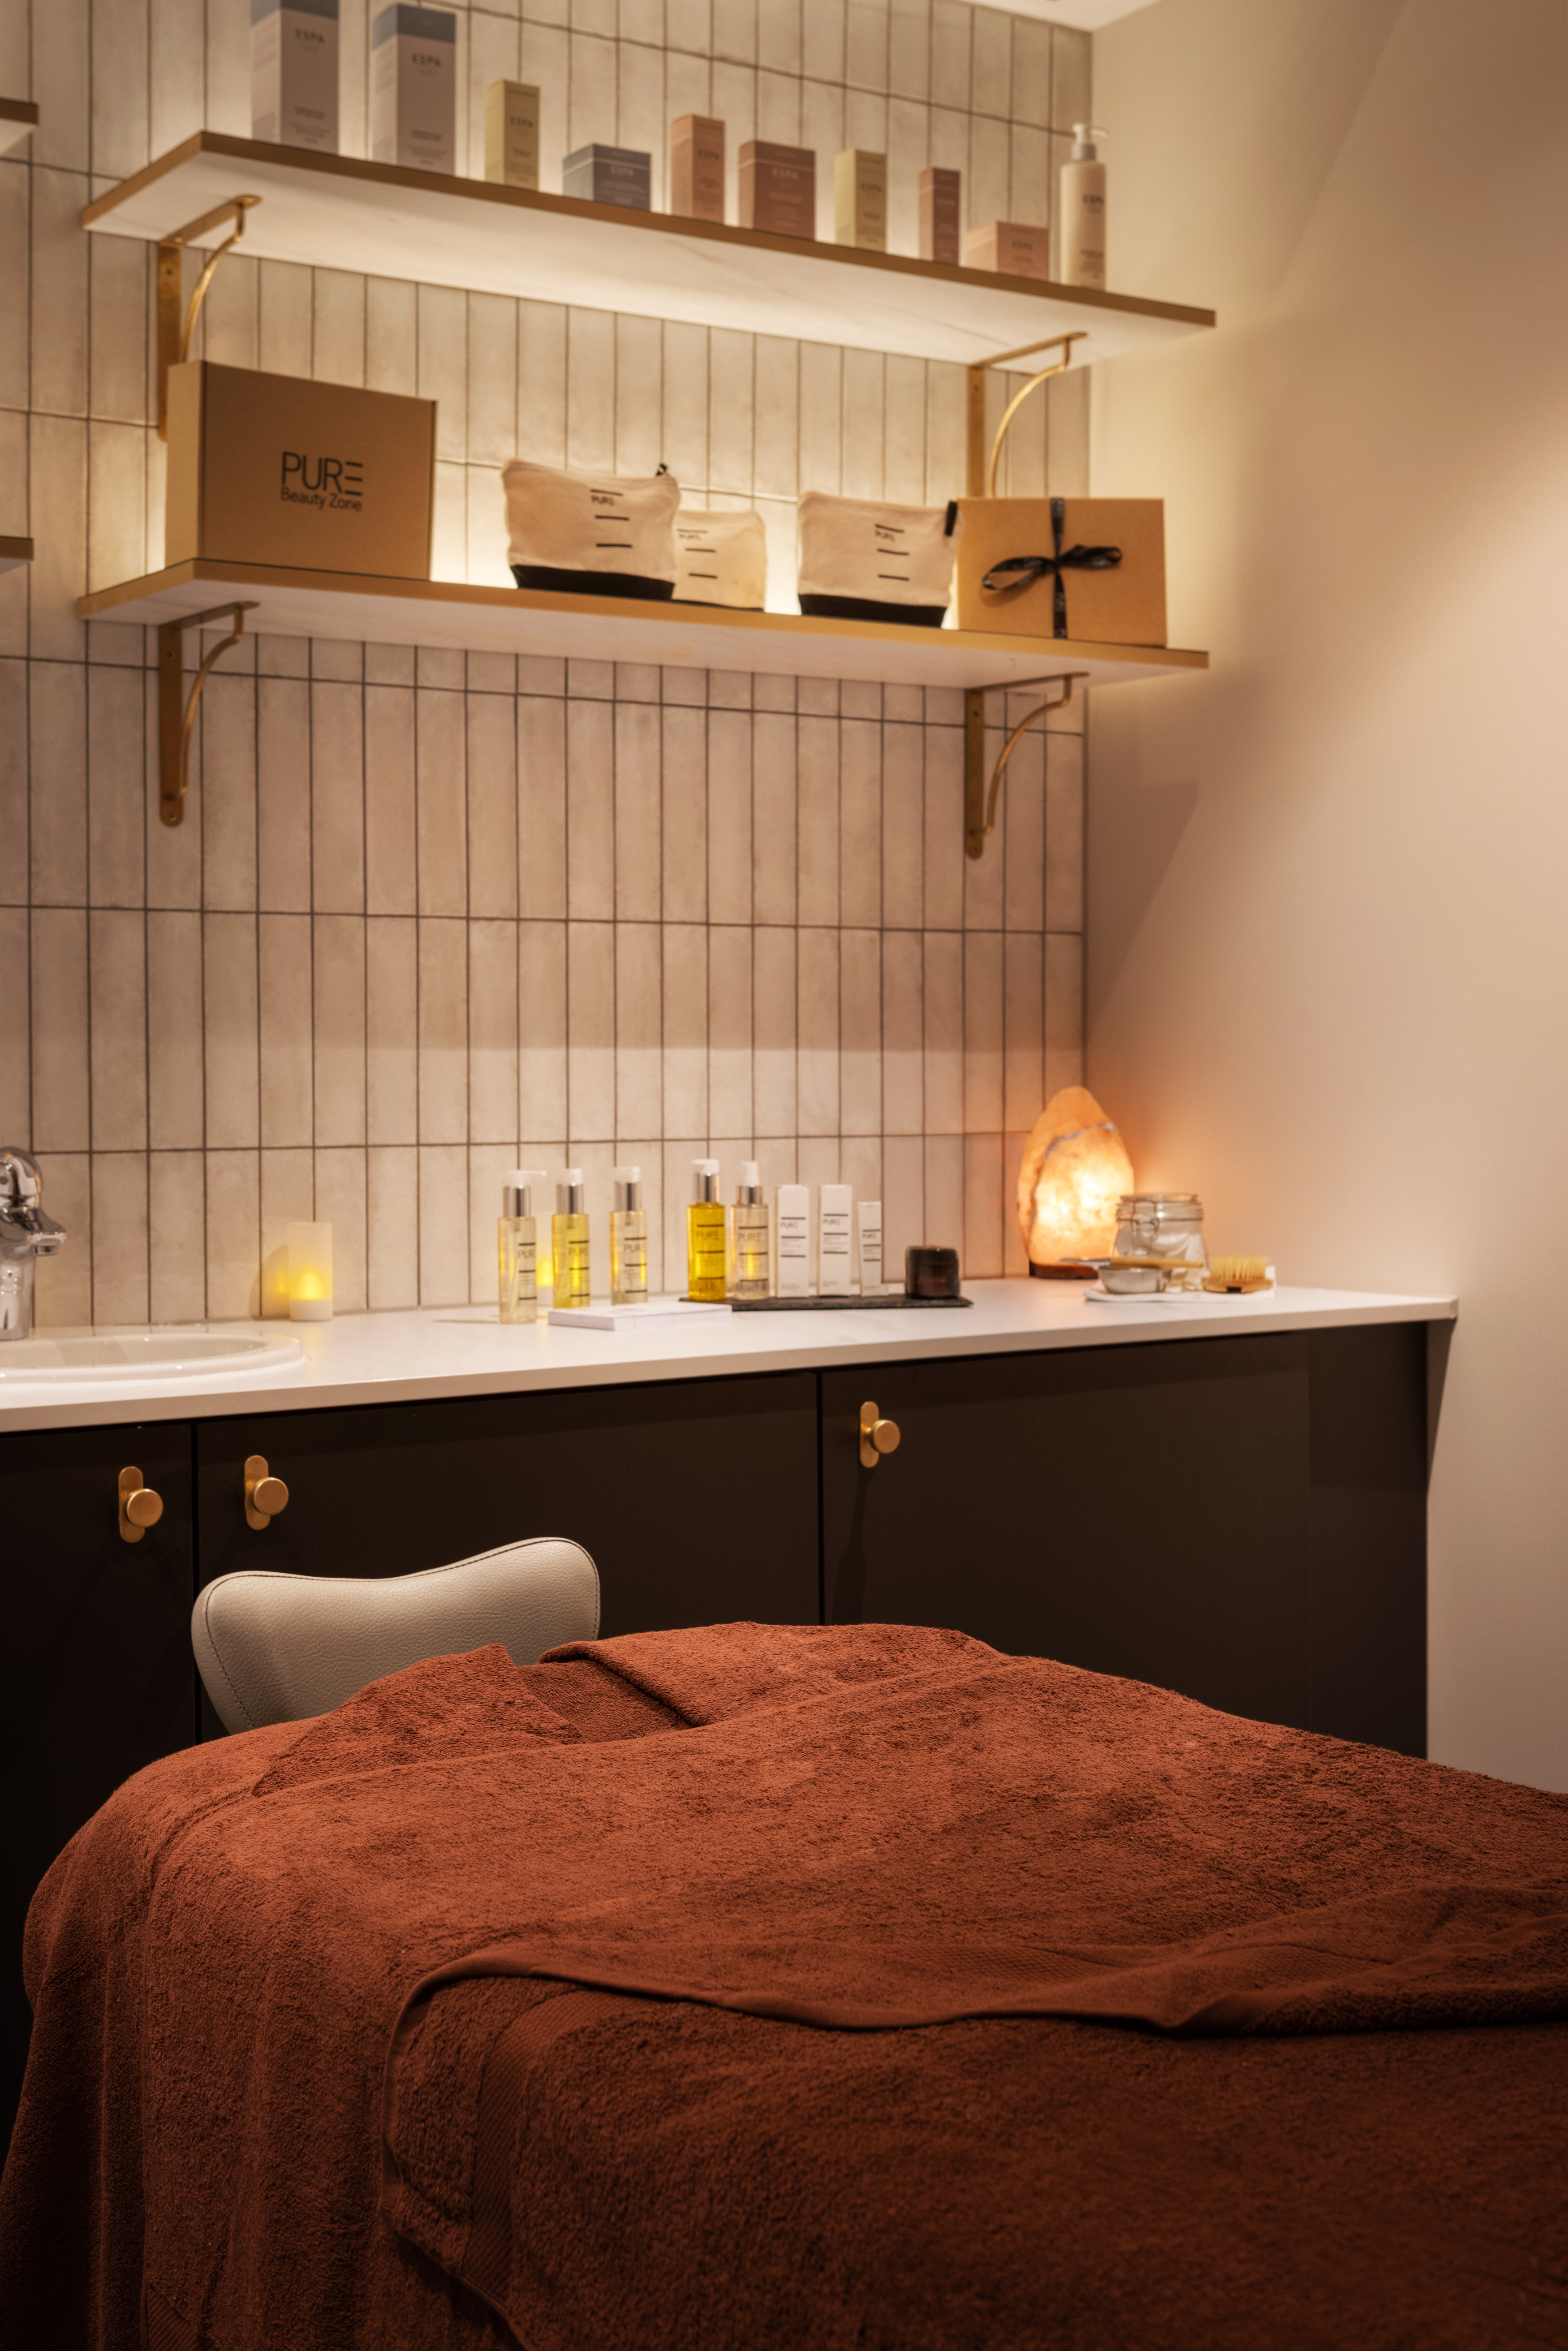 Couples Therapy Spa Day, PURE Spa And Beauty Hilton William Street